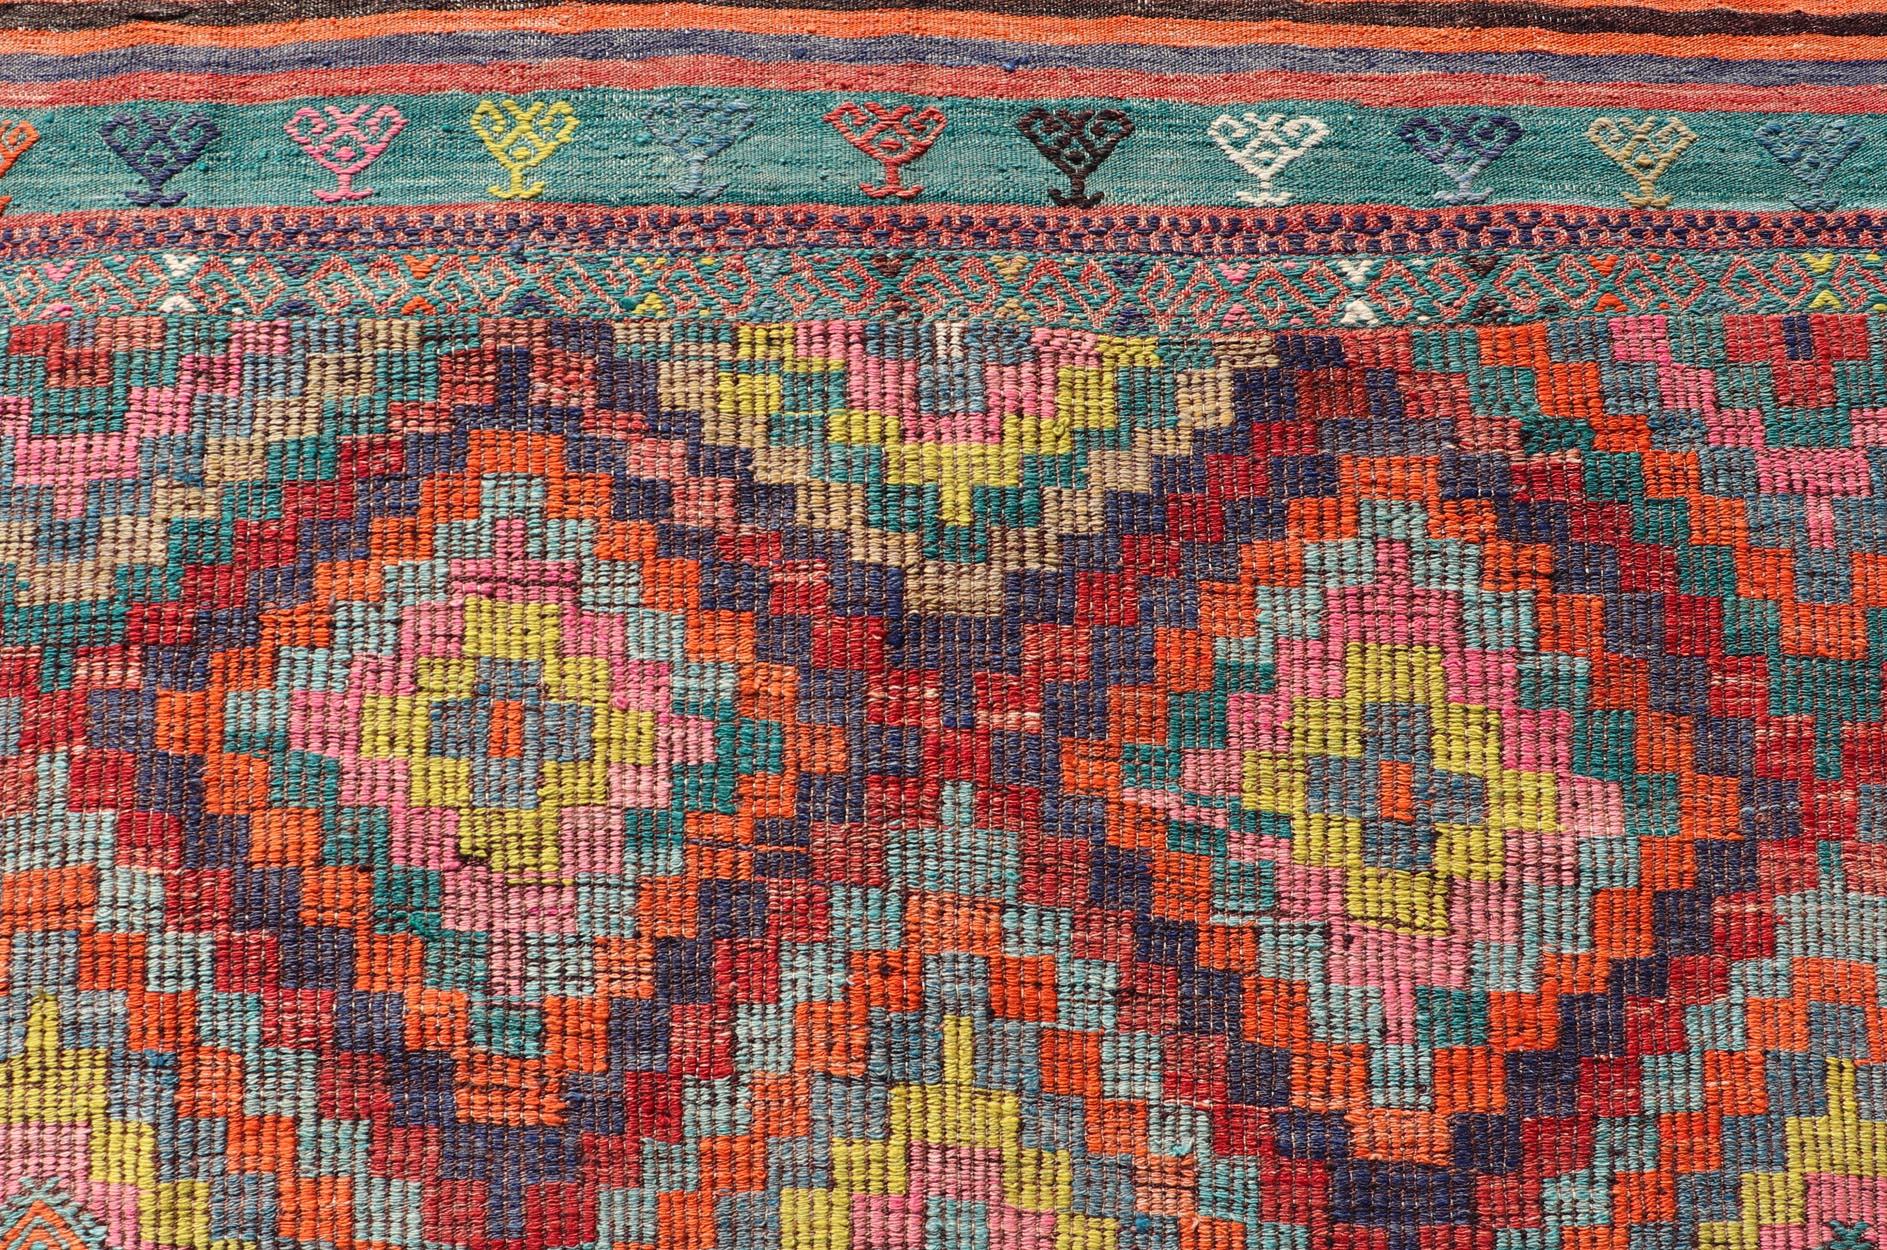 Measures: 6'5 x 8'9 
Colorful Vintage Turkish Flat-Weave Tribal Modern Kilim with Embroideries. Keivan Woven Arts / rug TU-NED-4698, country of origin / type: Turkey / Kilim, circa mid-20th Century.

Rendered in diamond shapes with a spotted and